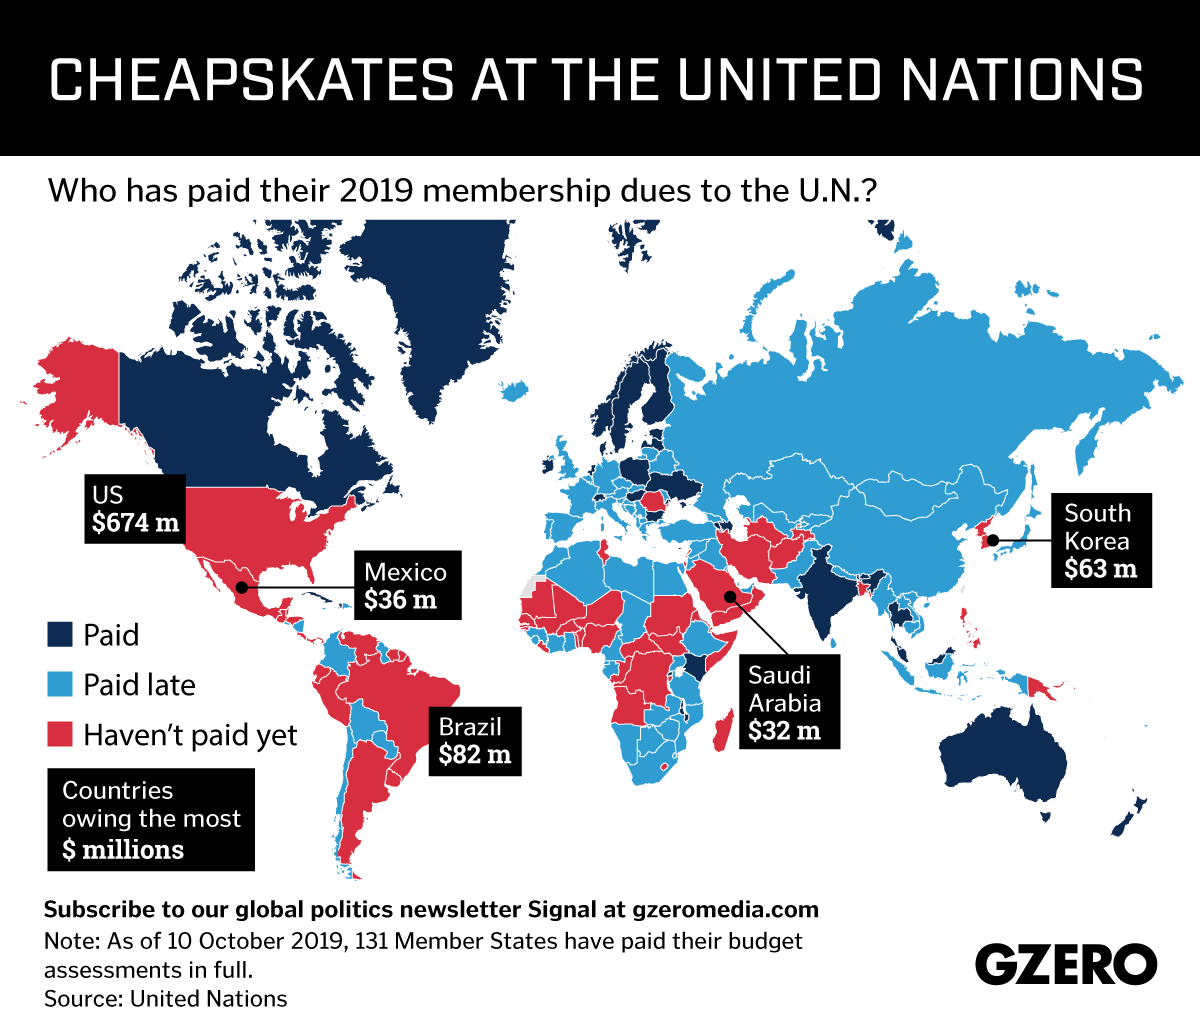 Graphic Truth: The United Nations of cheapskates